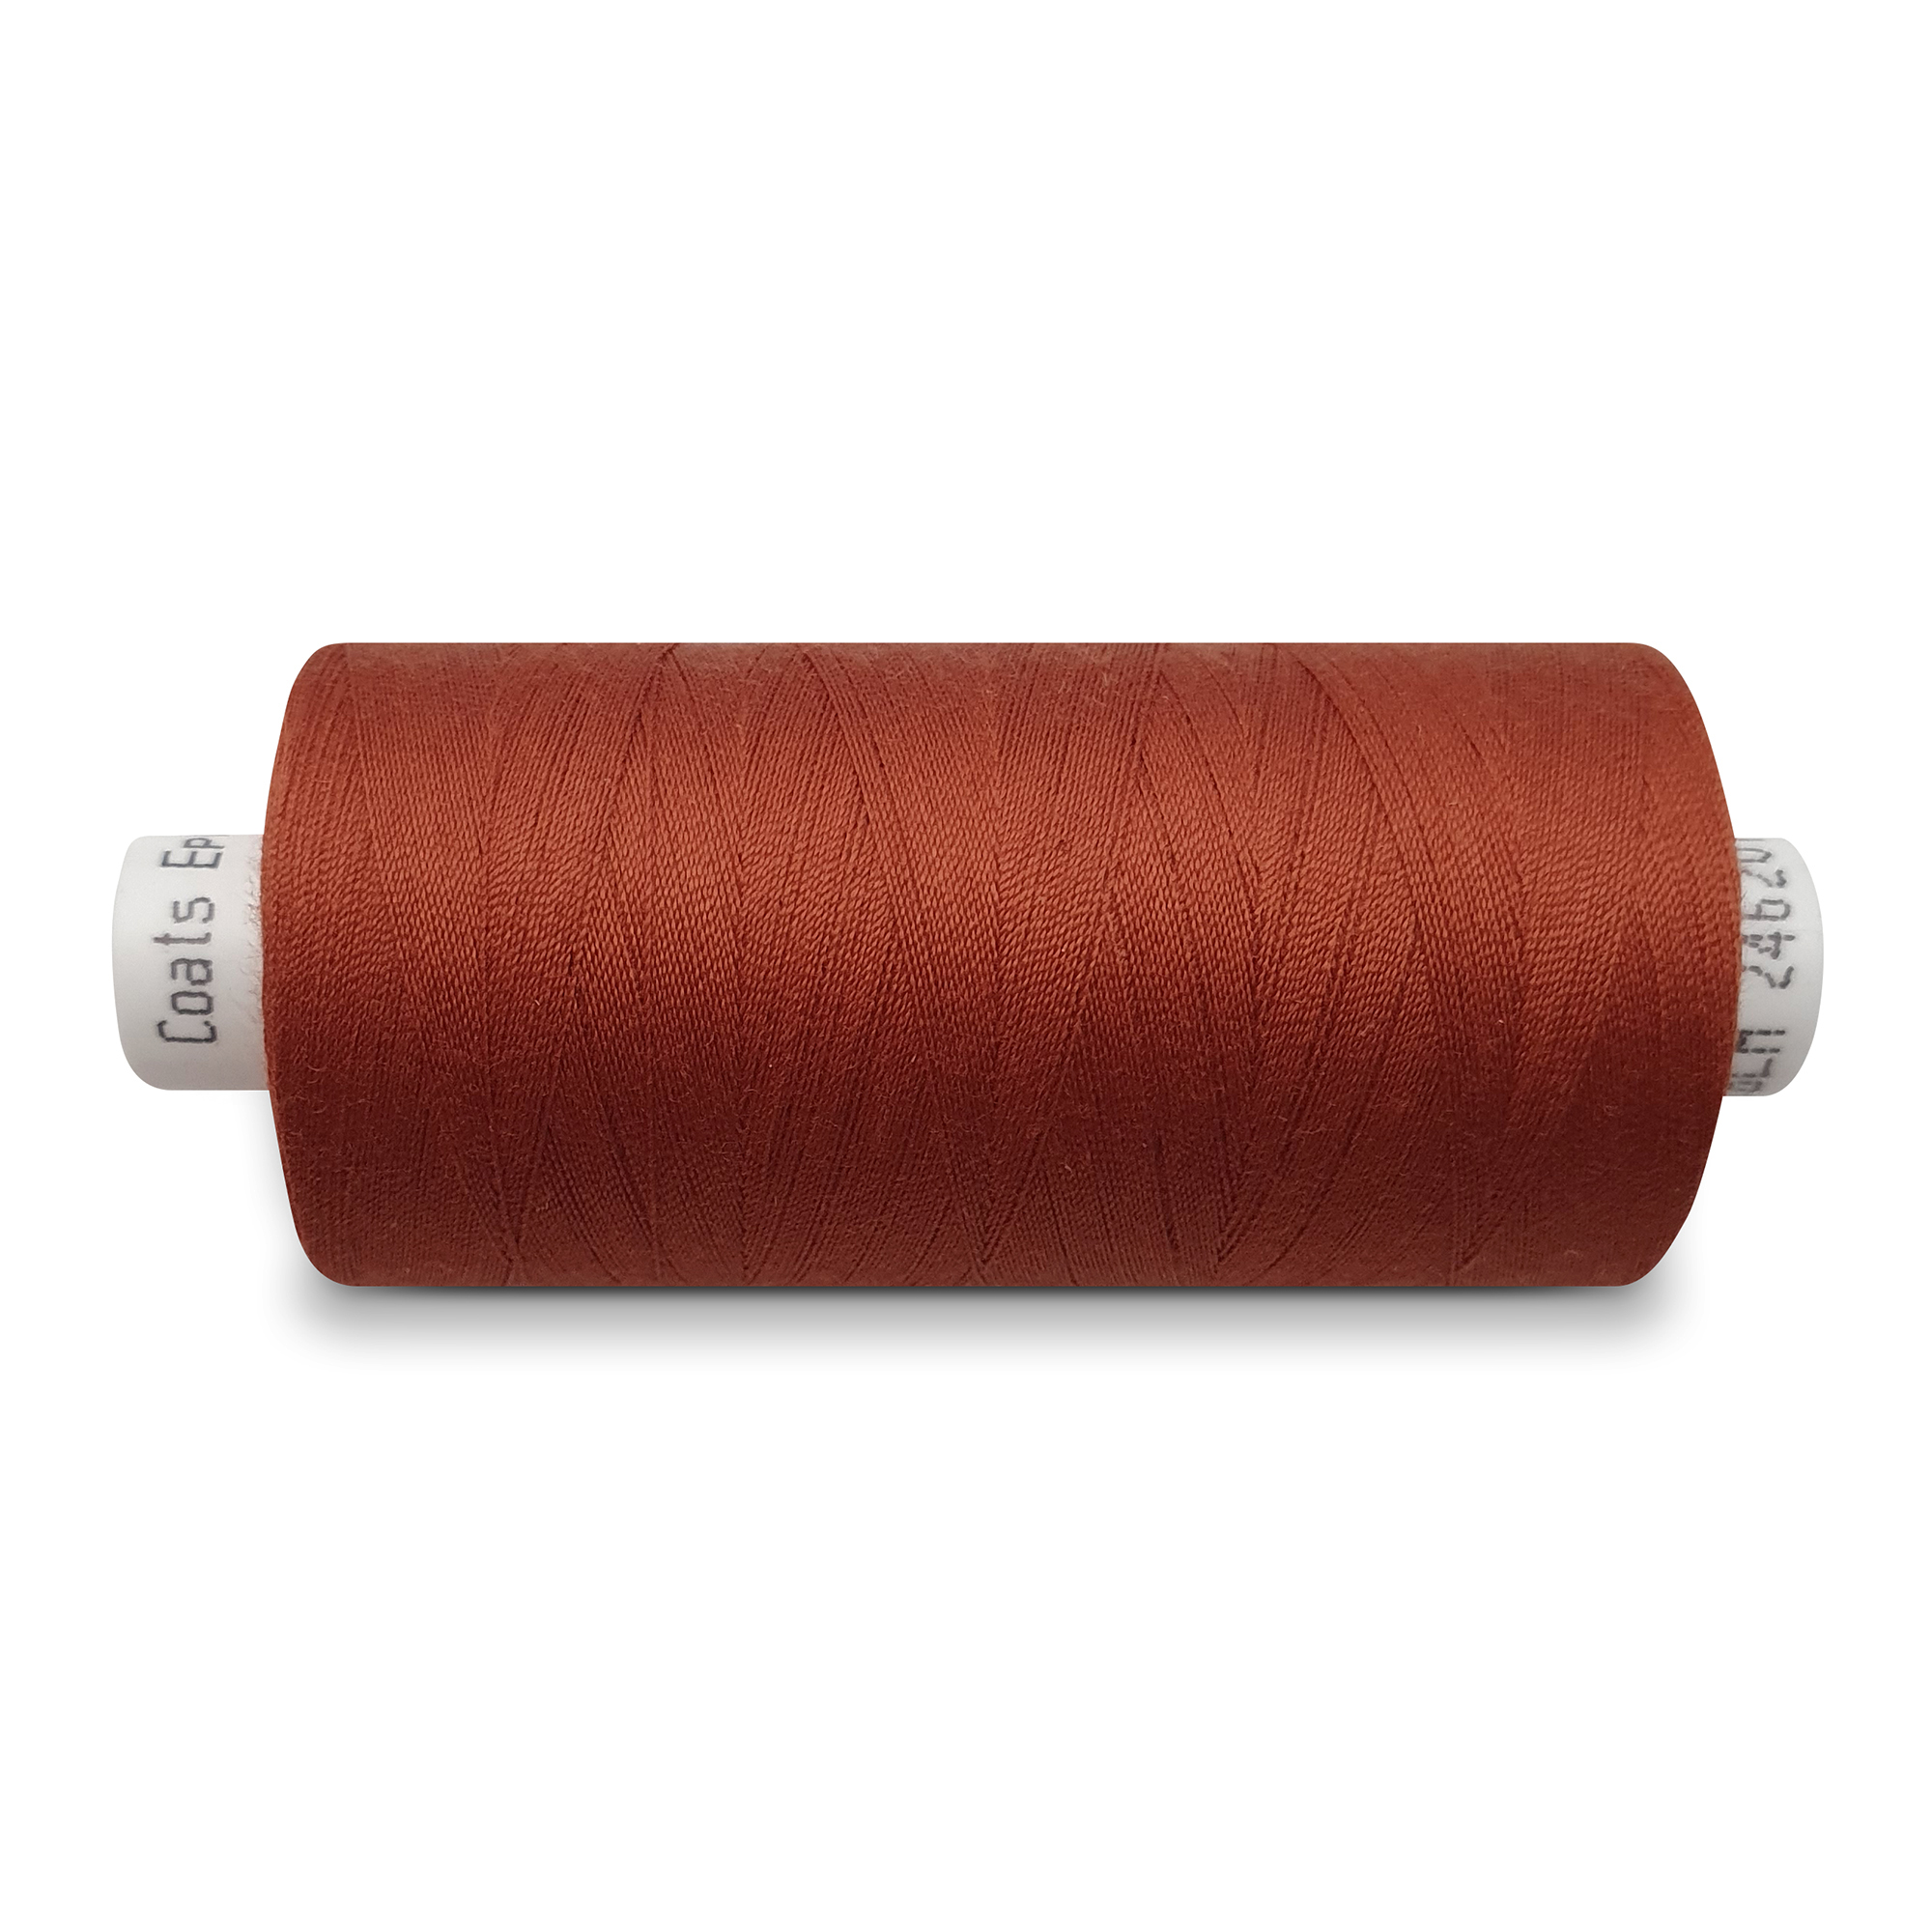 Jeans/Sewing thread whisky